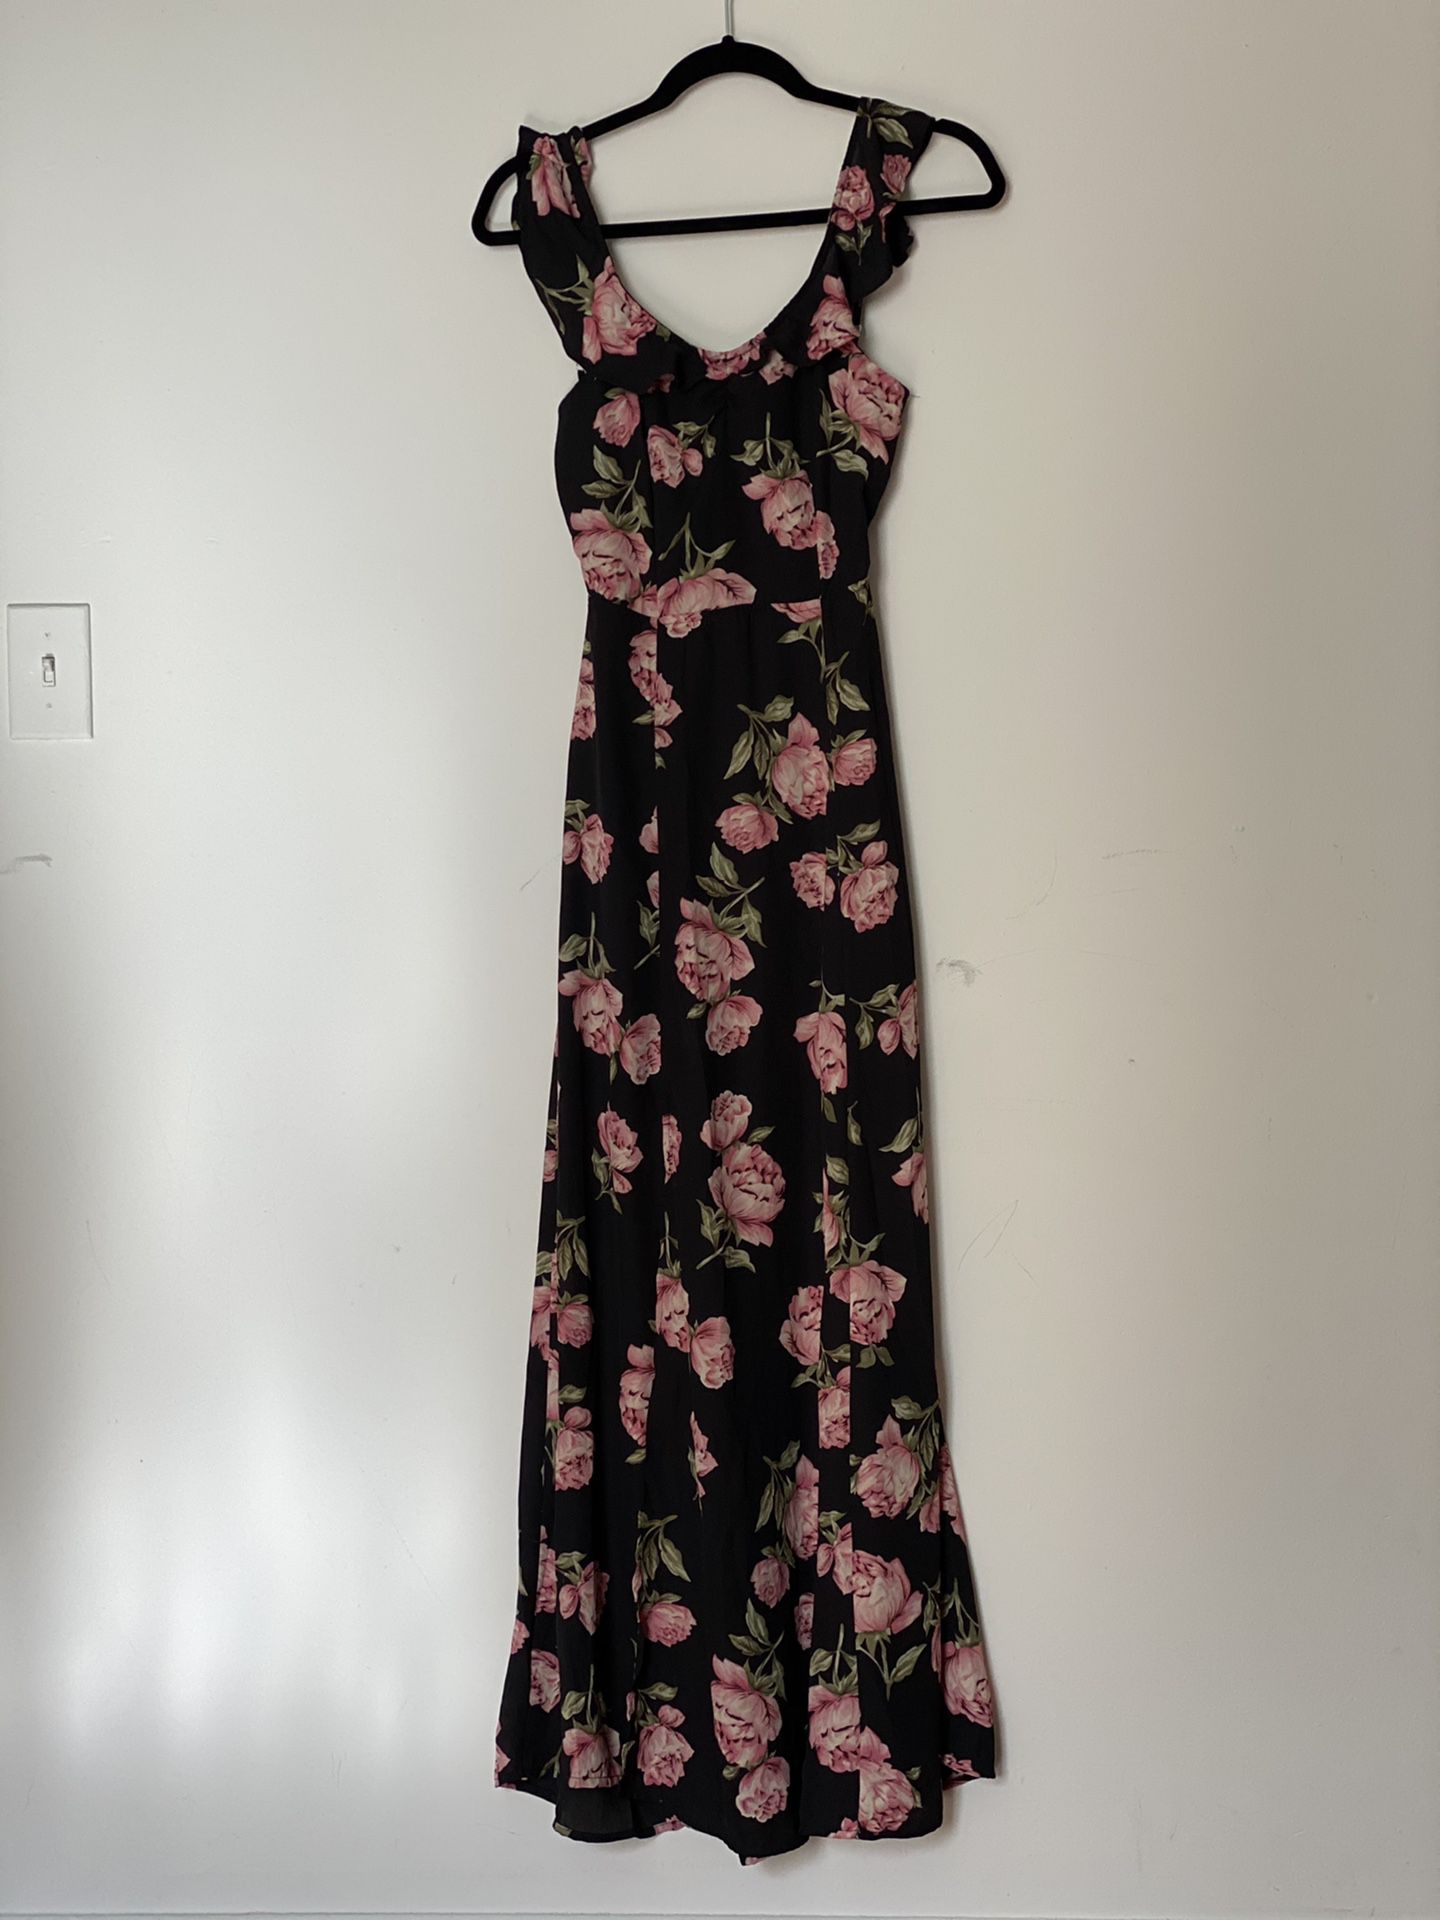 Open back knotted floral sun dress size XS